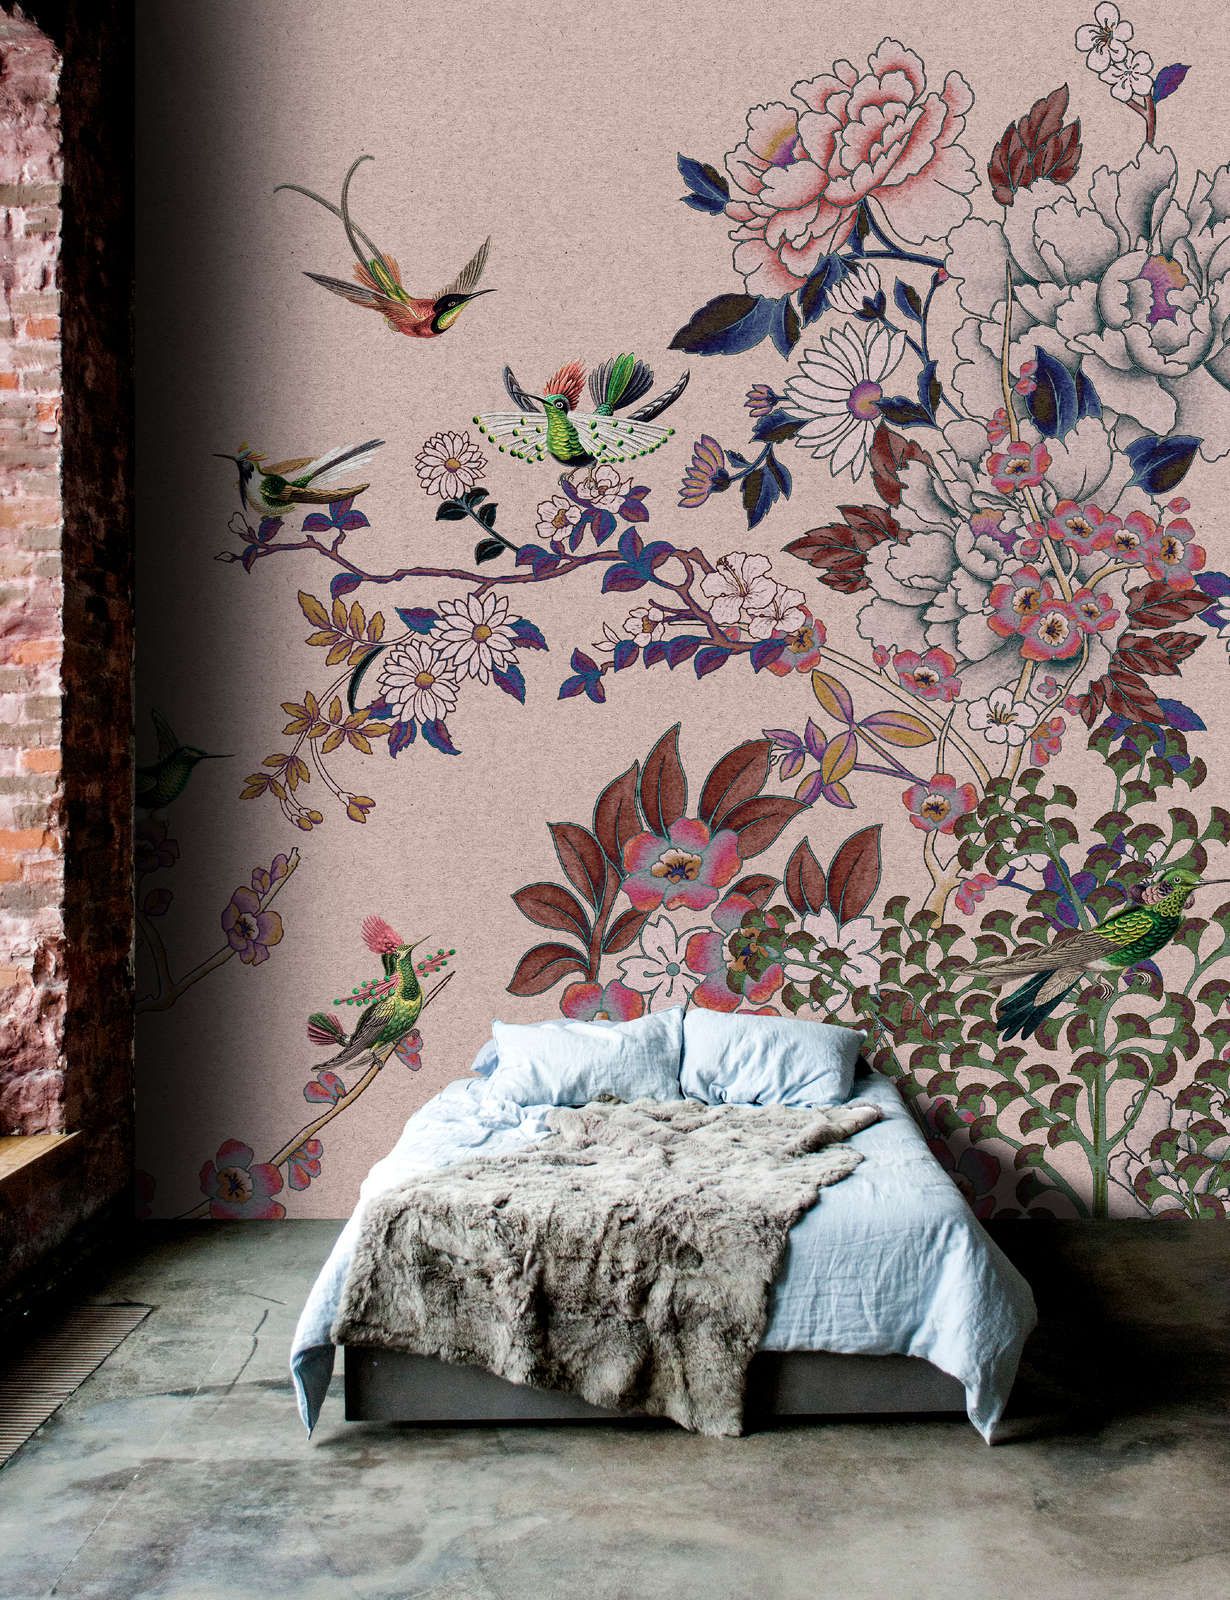             Photo wallpaper »madras 2« - Rose-coloured floral motif with hummingbirds on kraft paper texture - Smooth, slightly shiny premium non-woven fabric
        